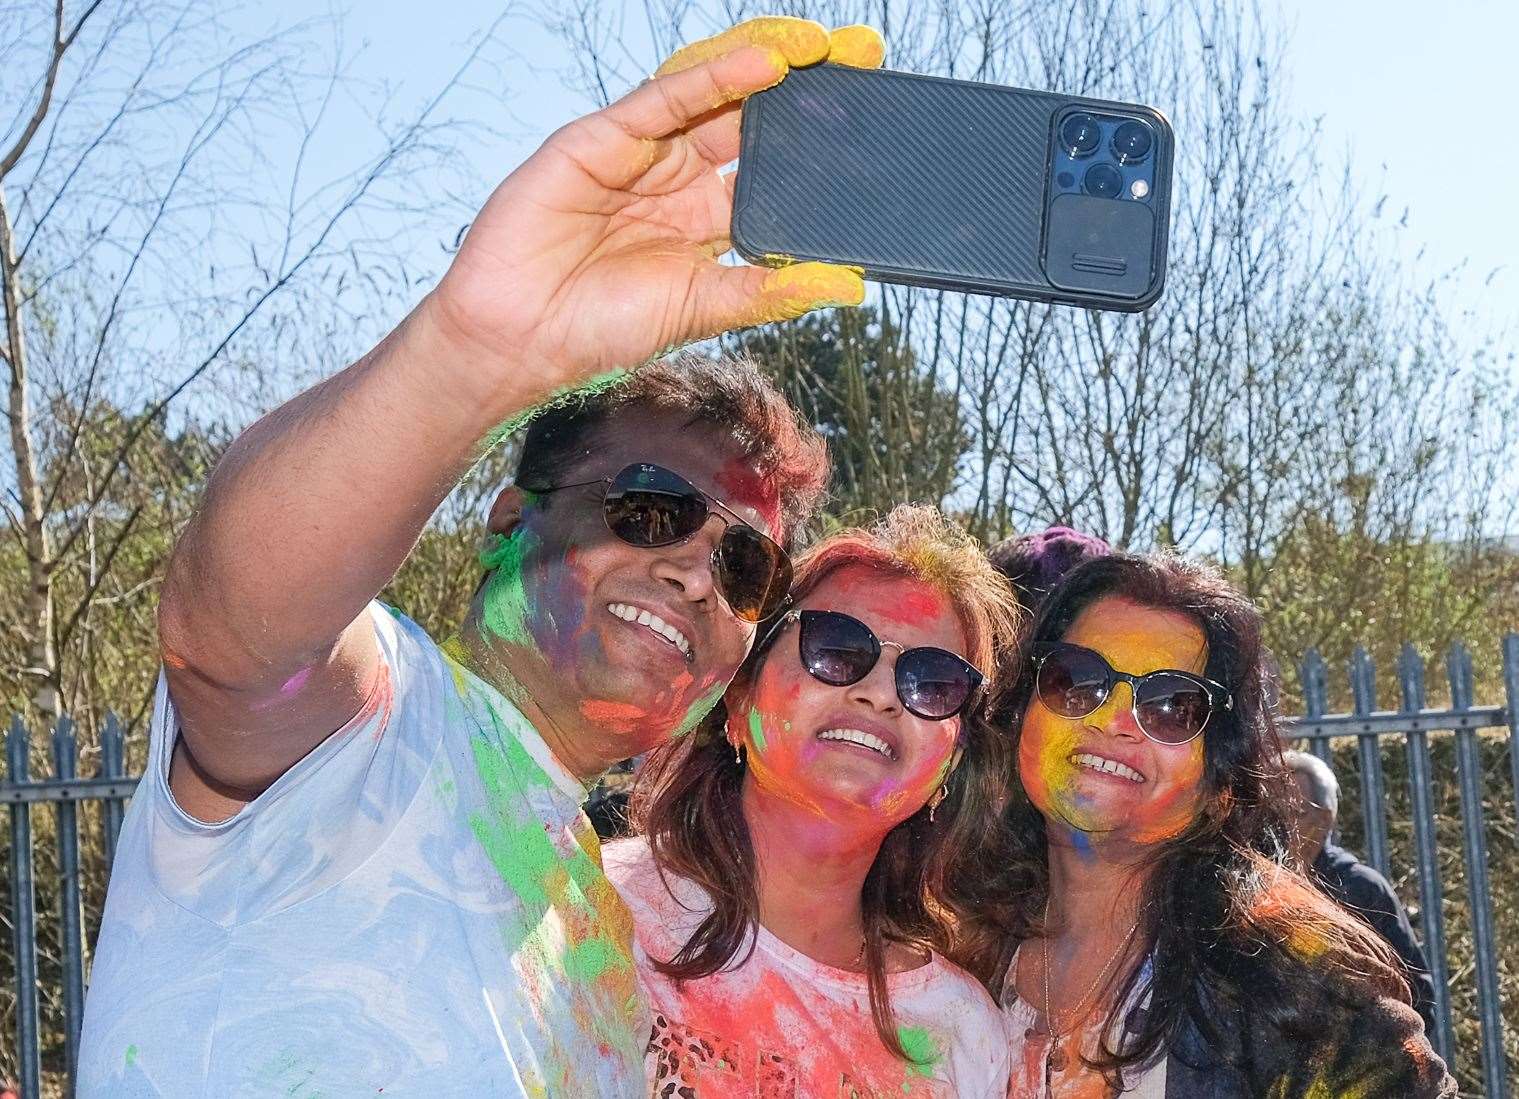 Holi takes place on March 8 and marks the start of spring and new life